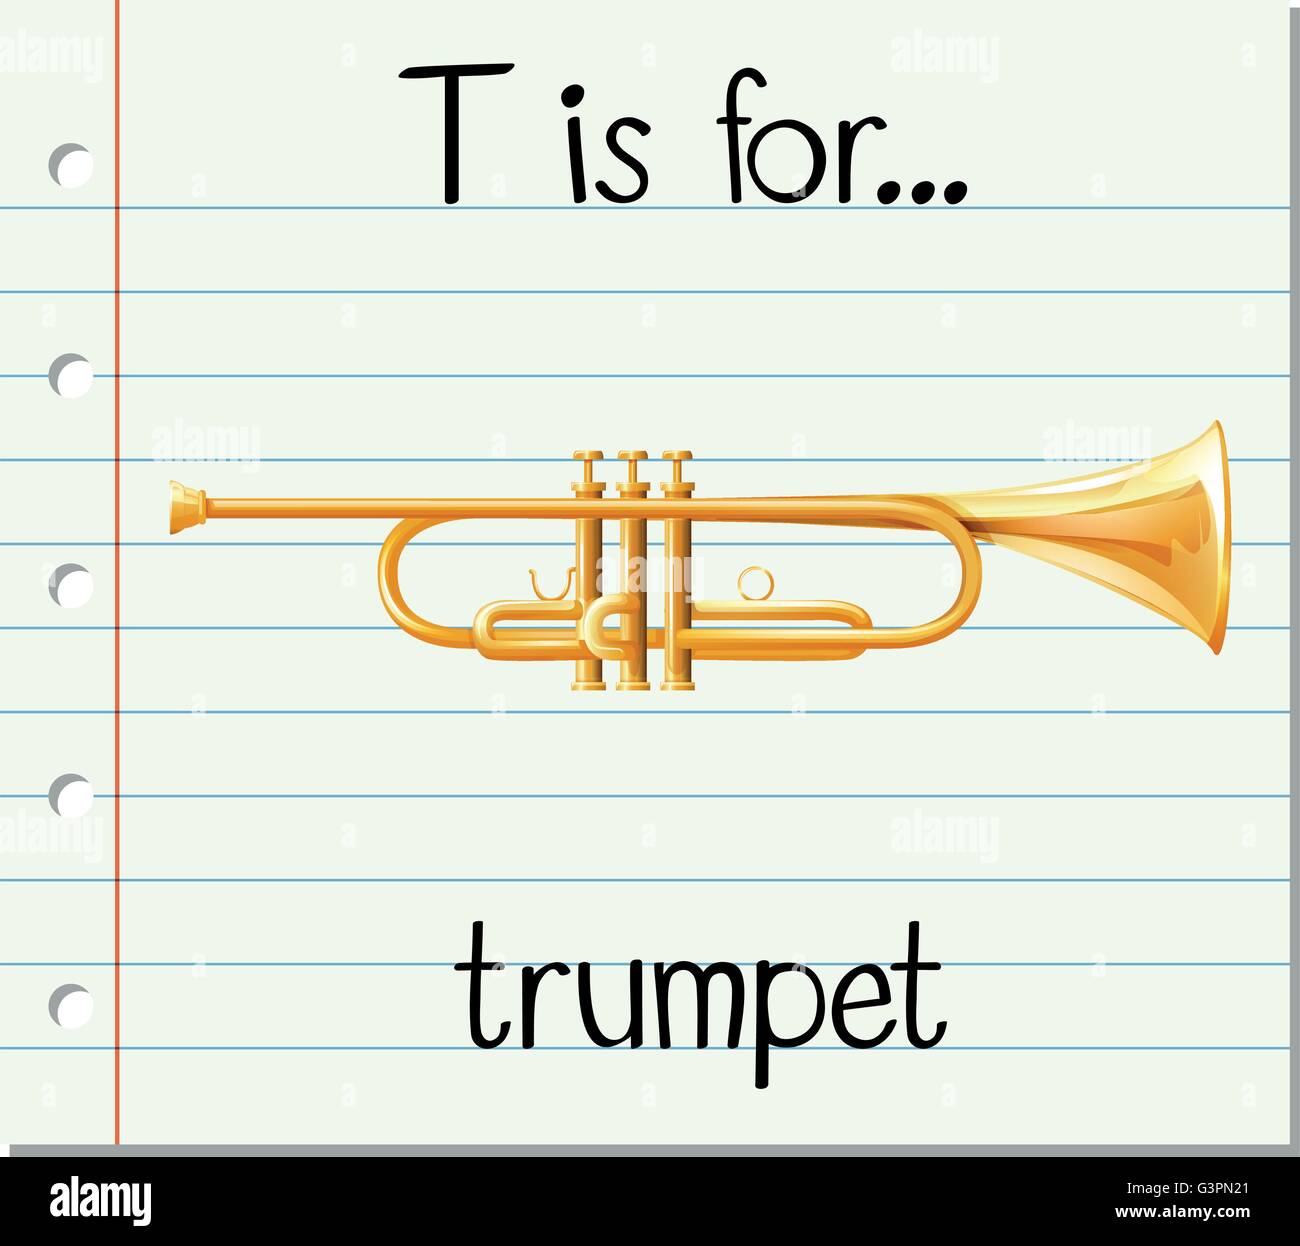 Flashcard letter T is for trumpet illustration Stock Vector